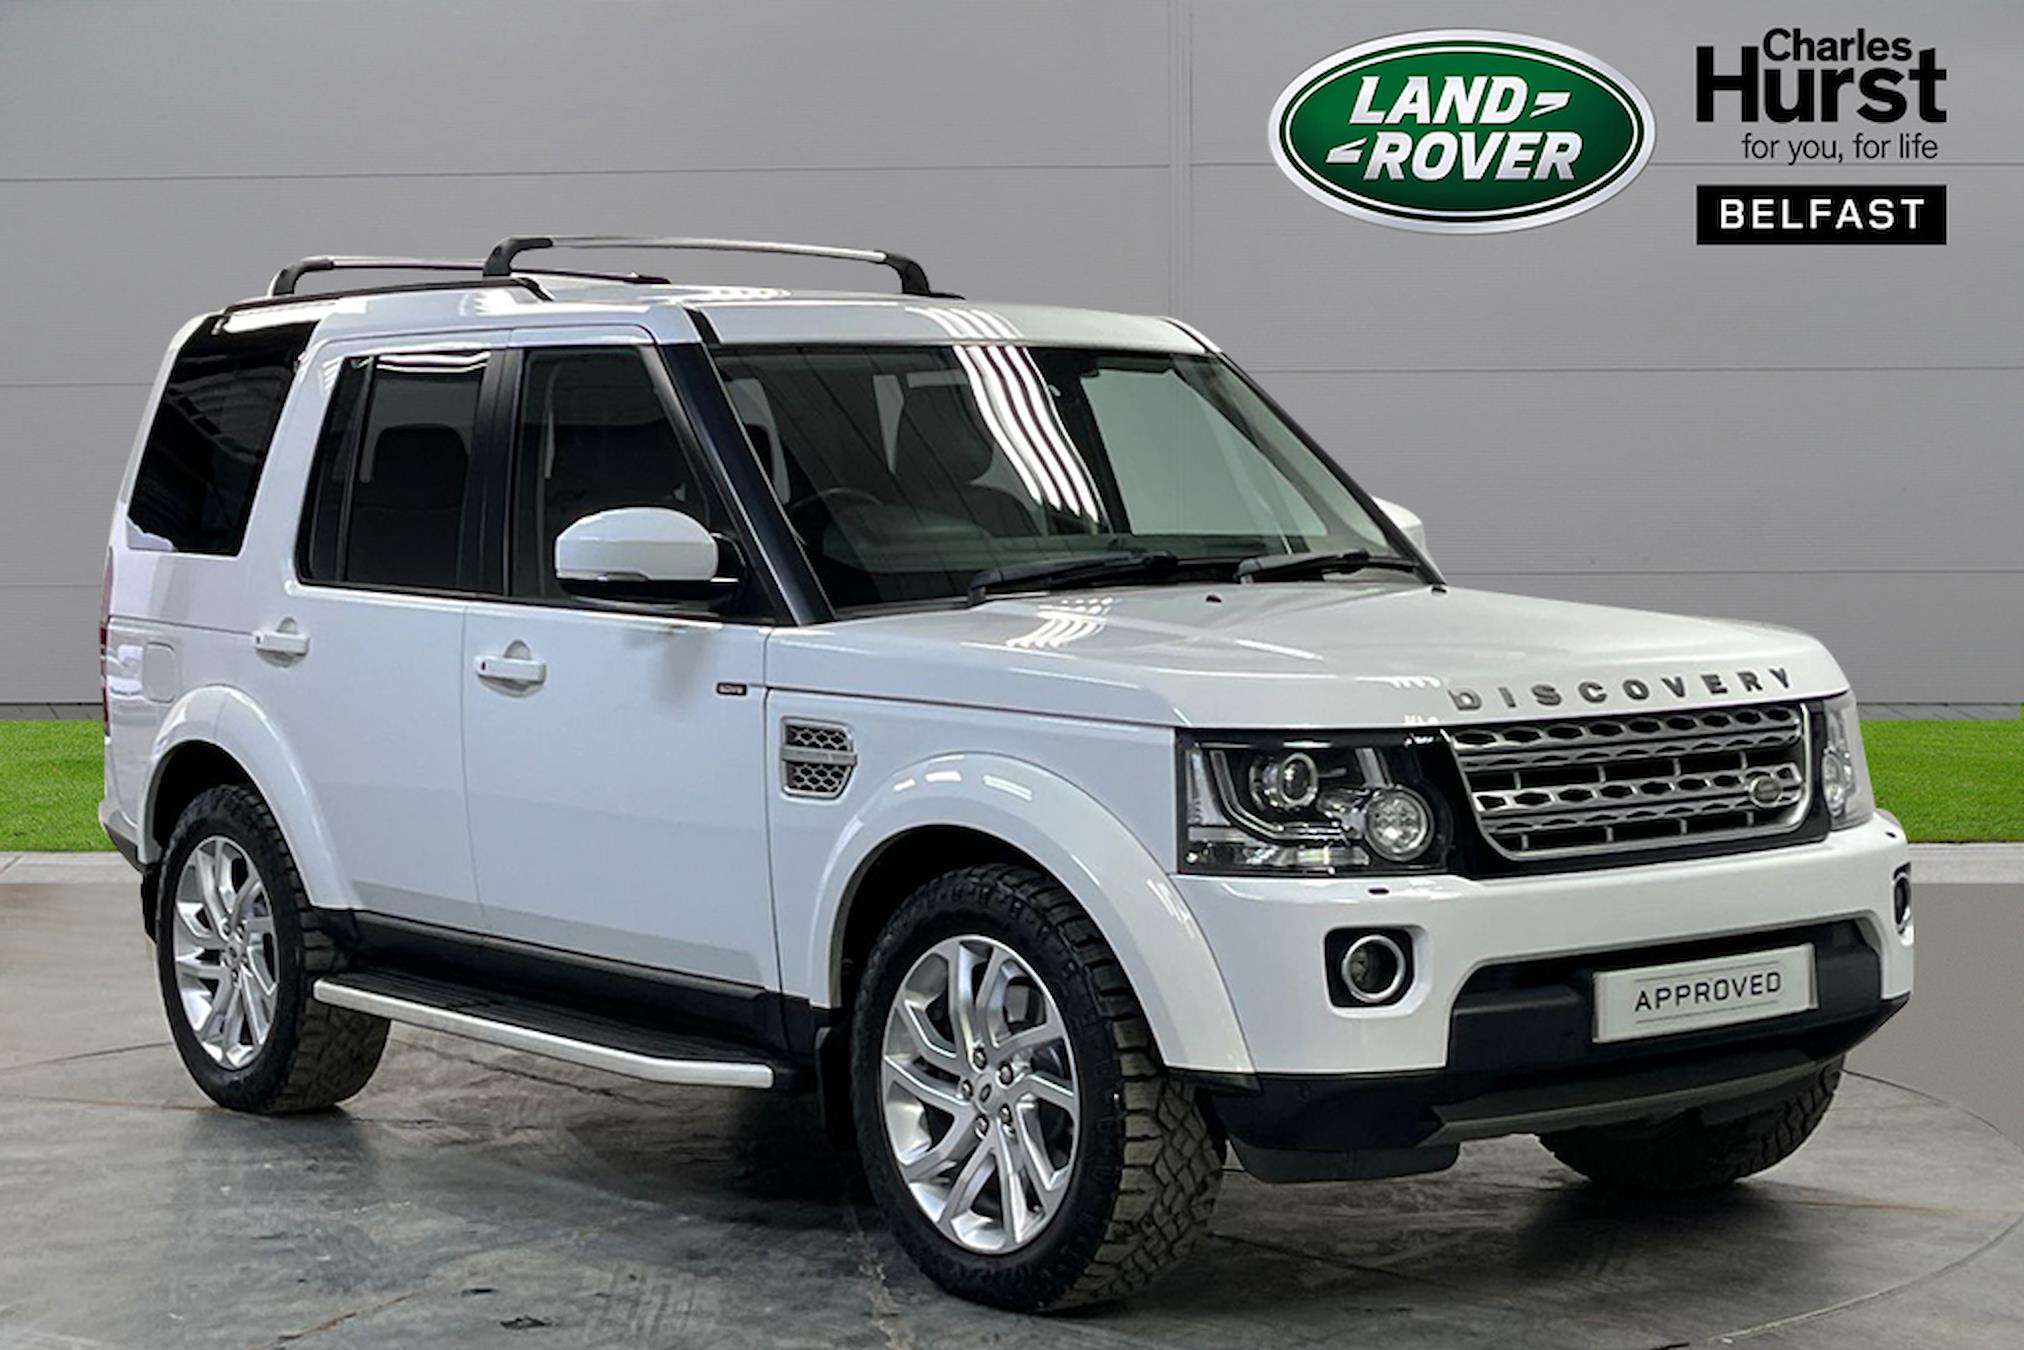 LAND ROVER DISCOVERY DIESEL SW